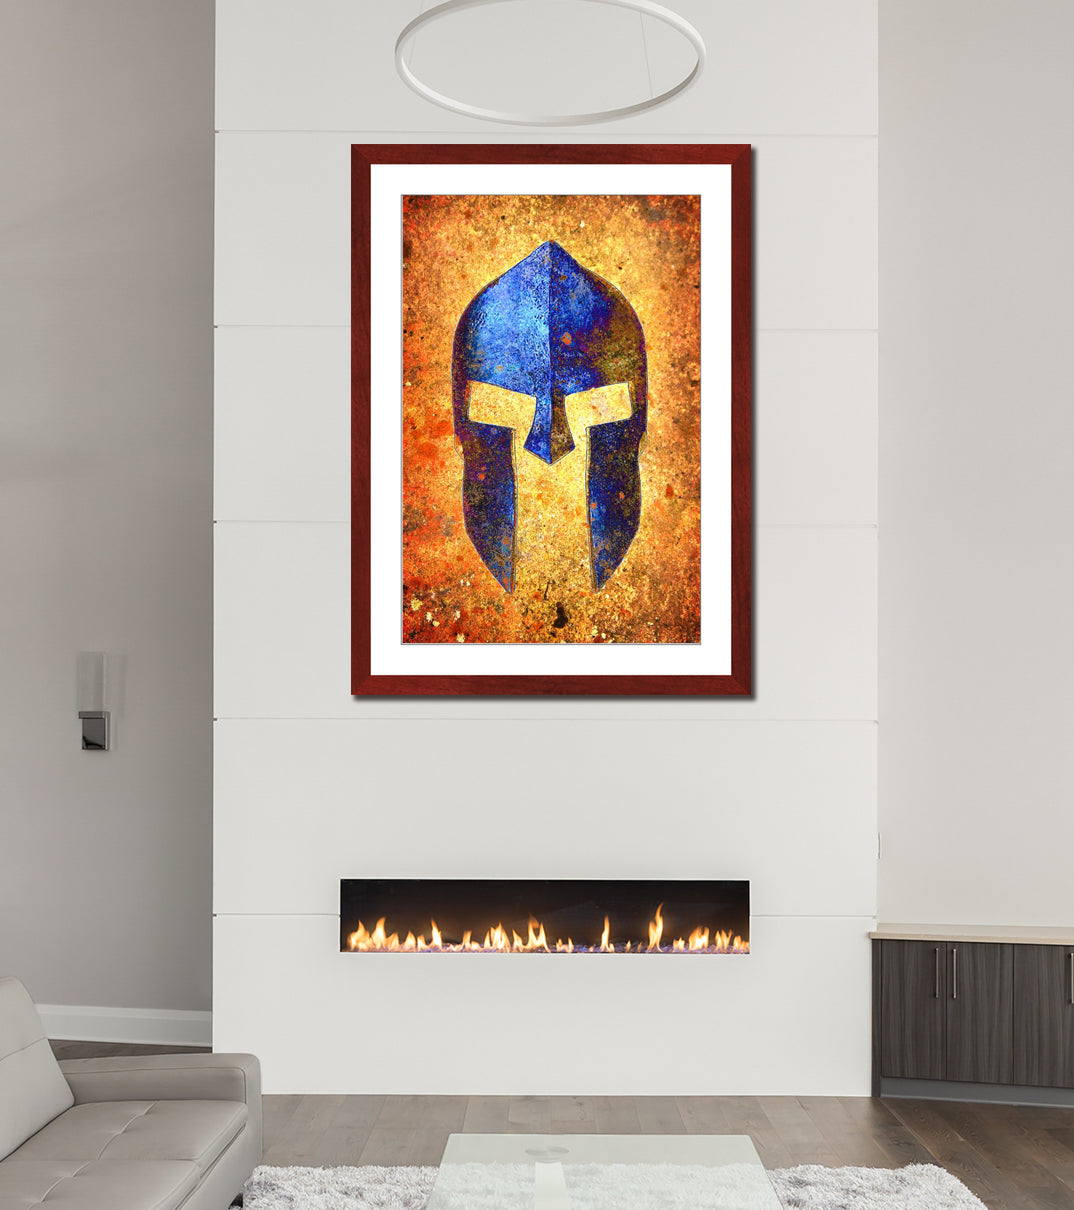 Spartan Themed Framed Wall Art - Blue Spartan Helmet on Rusted Background Print Framed in a Cherry Color Wood Frame